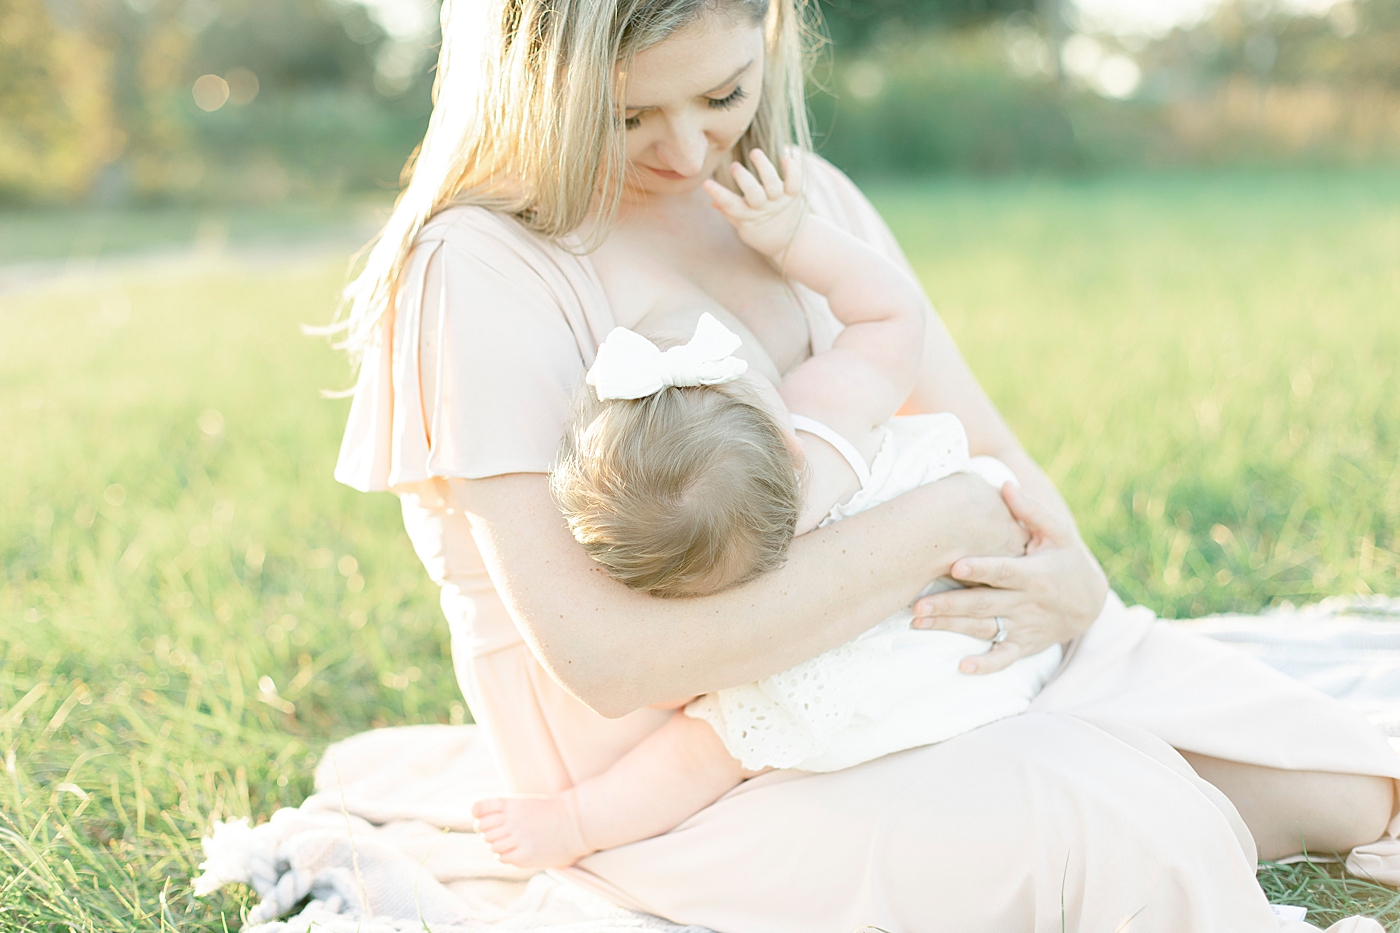 Baby nursing with mom sitting in the grass | Photo by Little Sunshine Photography 